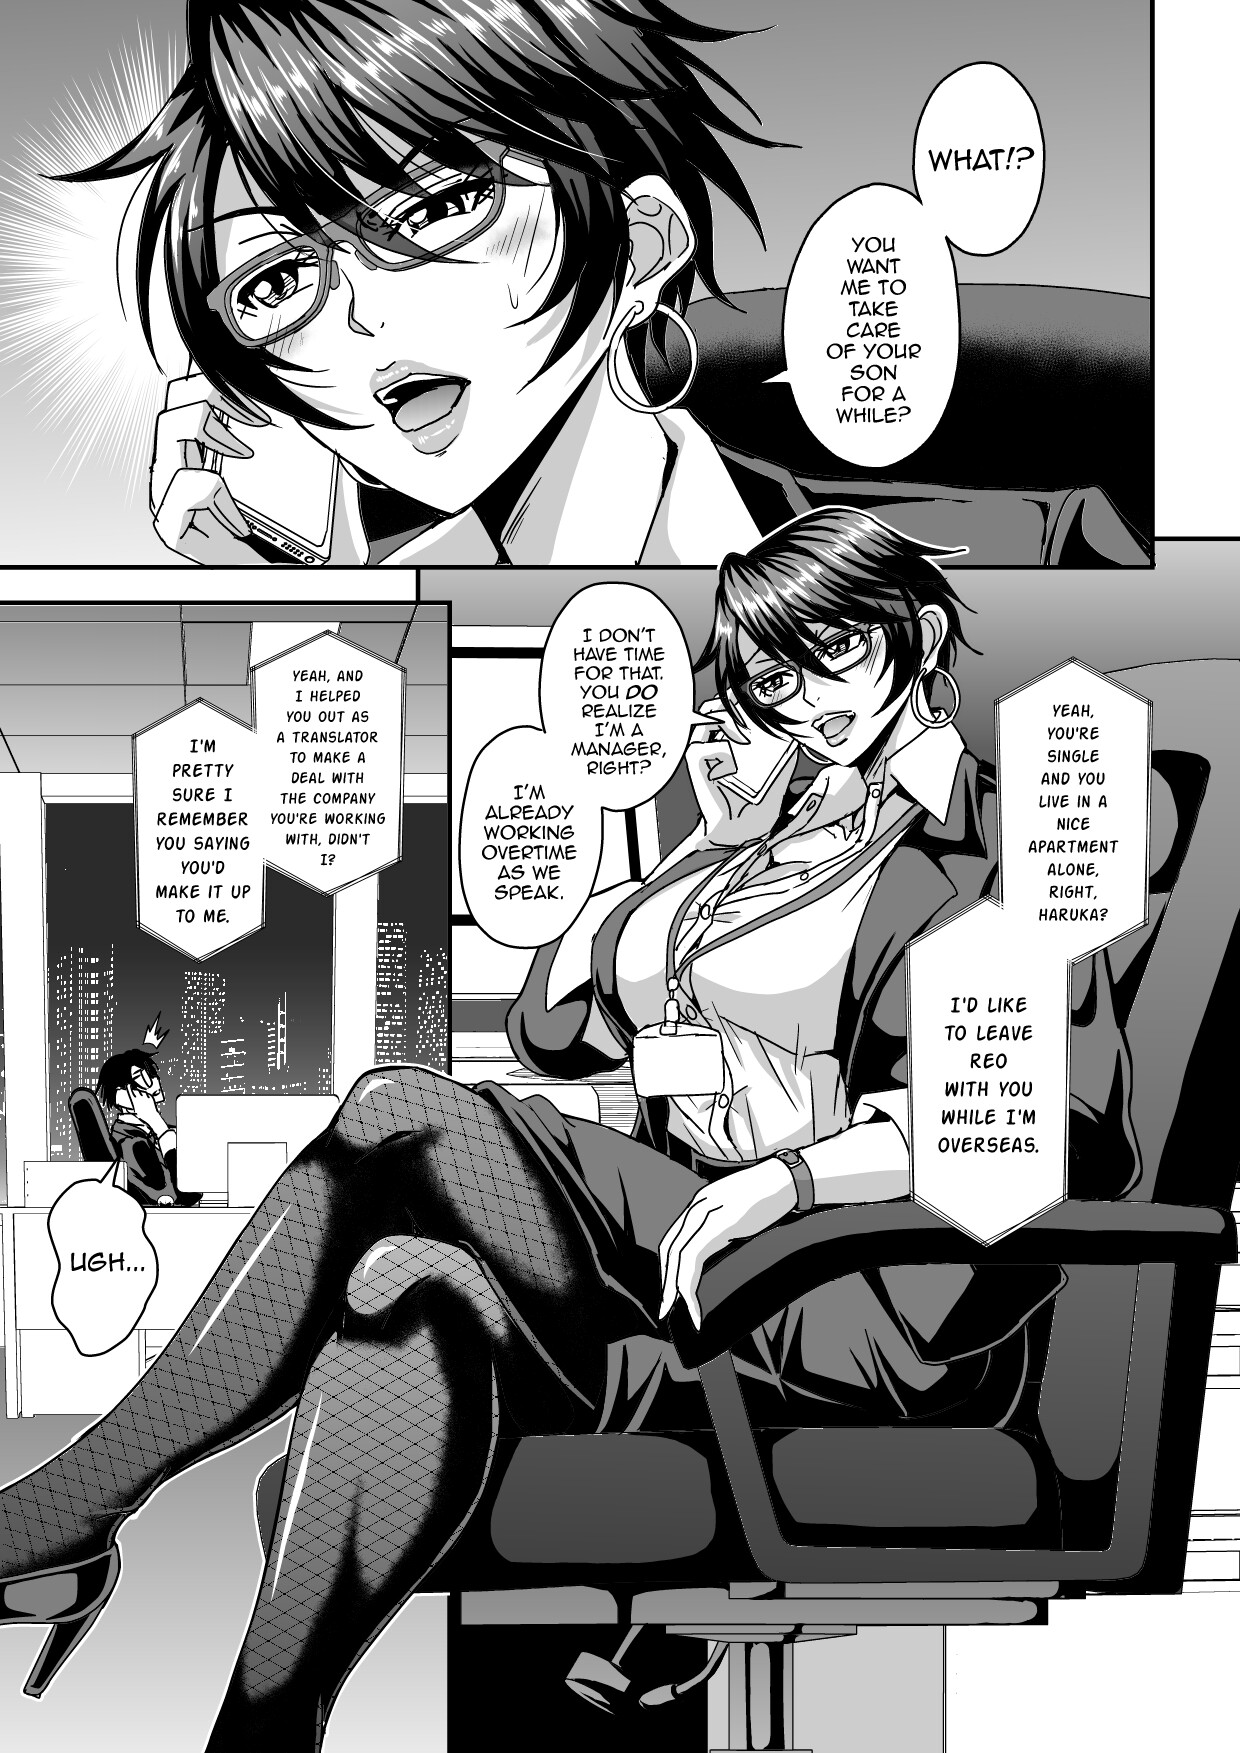 Hentai Manga Comic-A Story About a Bachelor Woman Around 40 Who is Addicted to a Relationship with a Younger Boy Who is Also a Friend's Son-Read-2